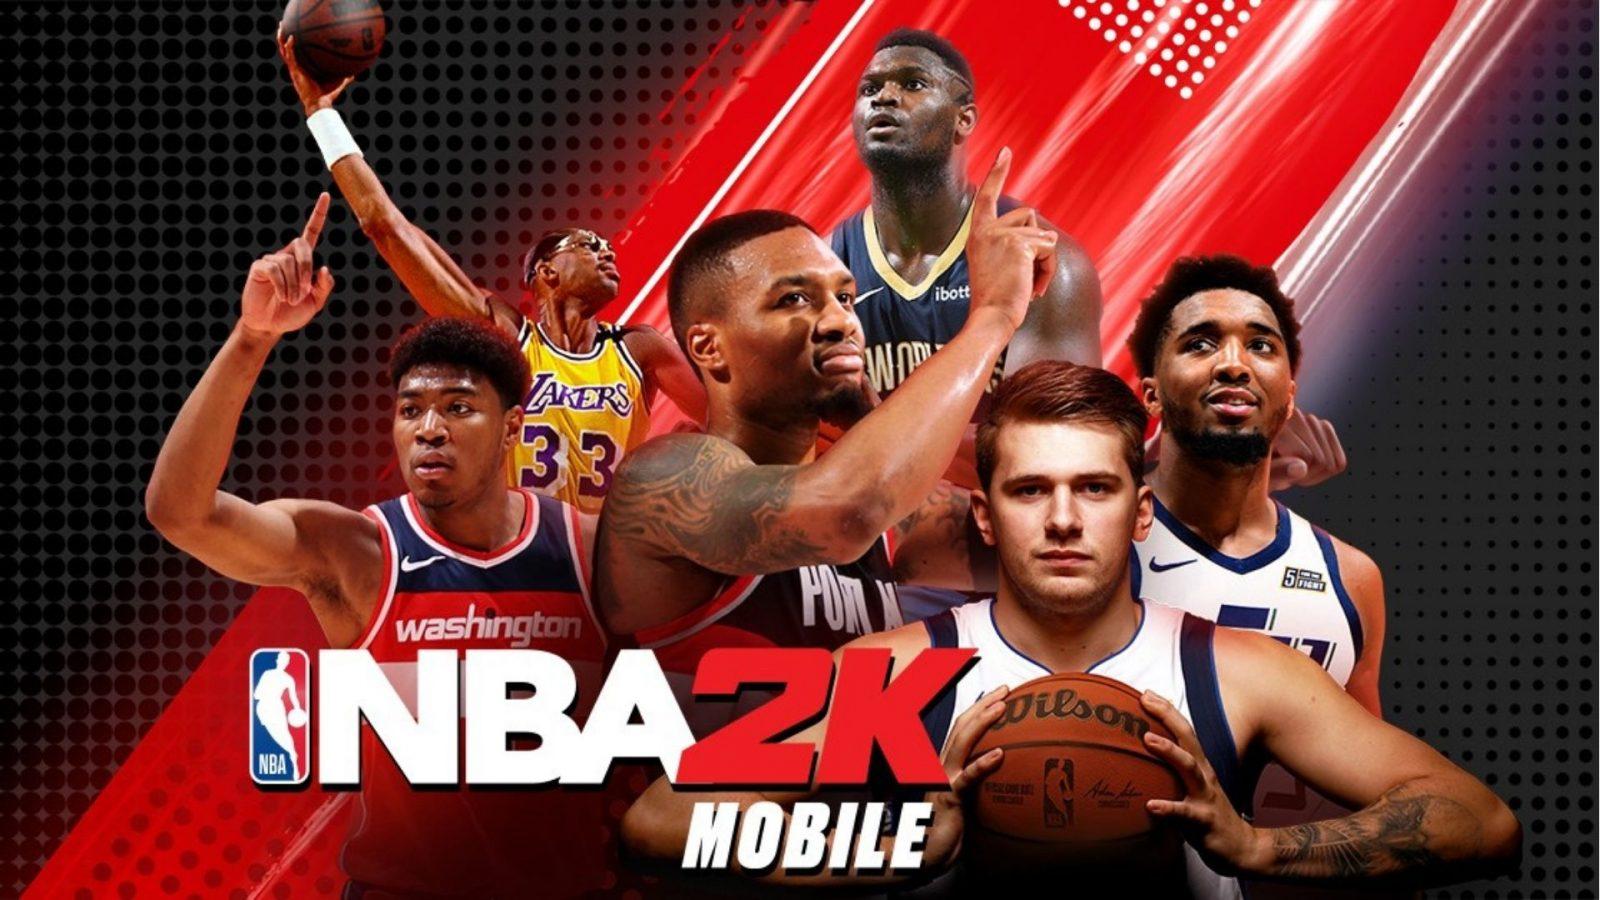 poster for nba 2k mobile featuring multiple players